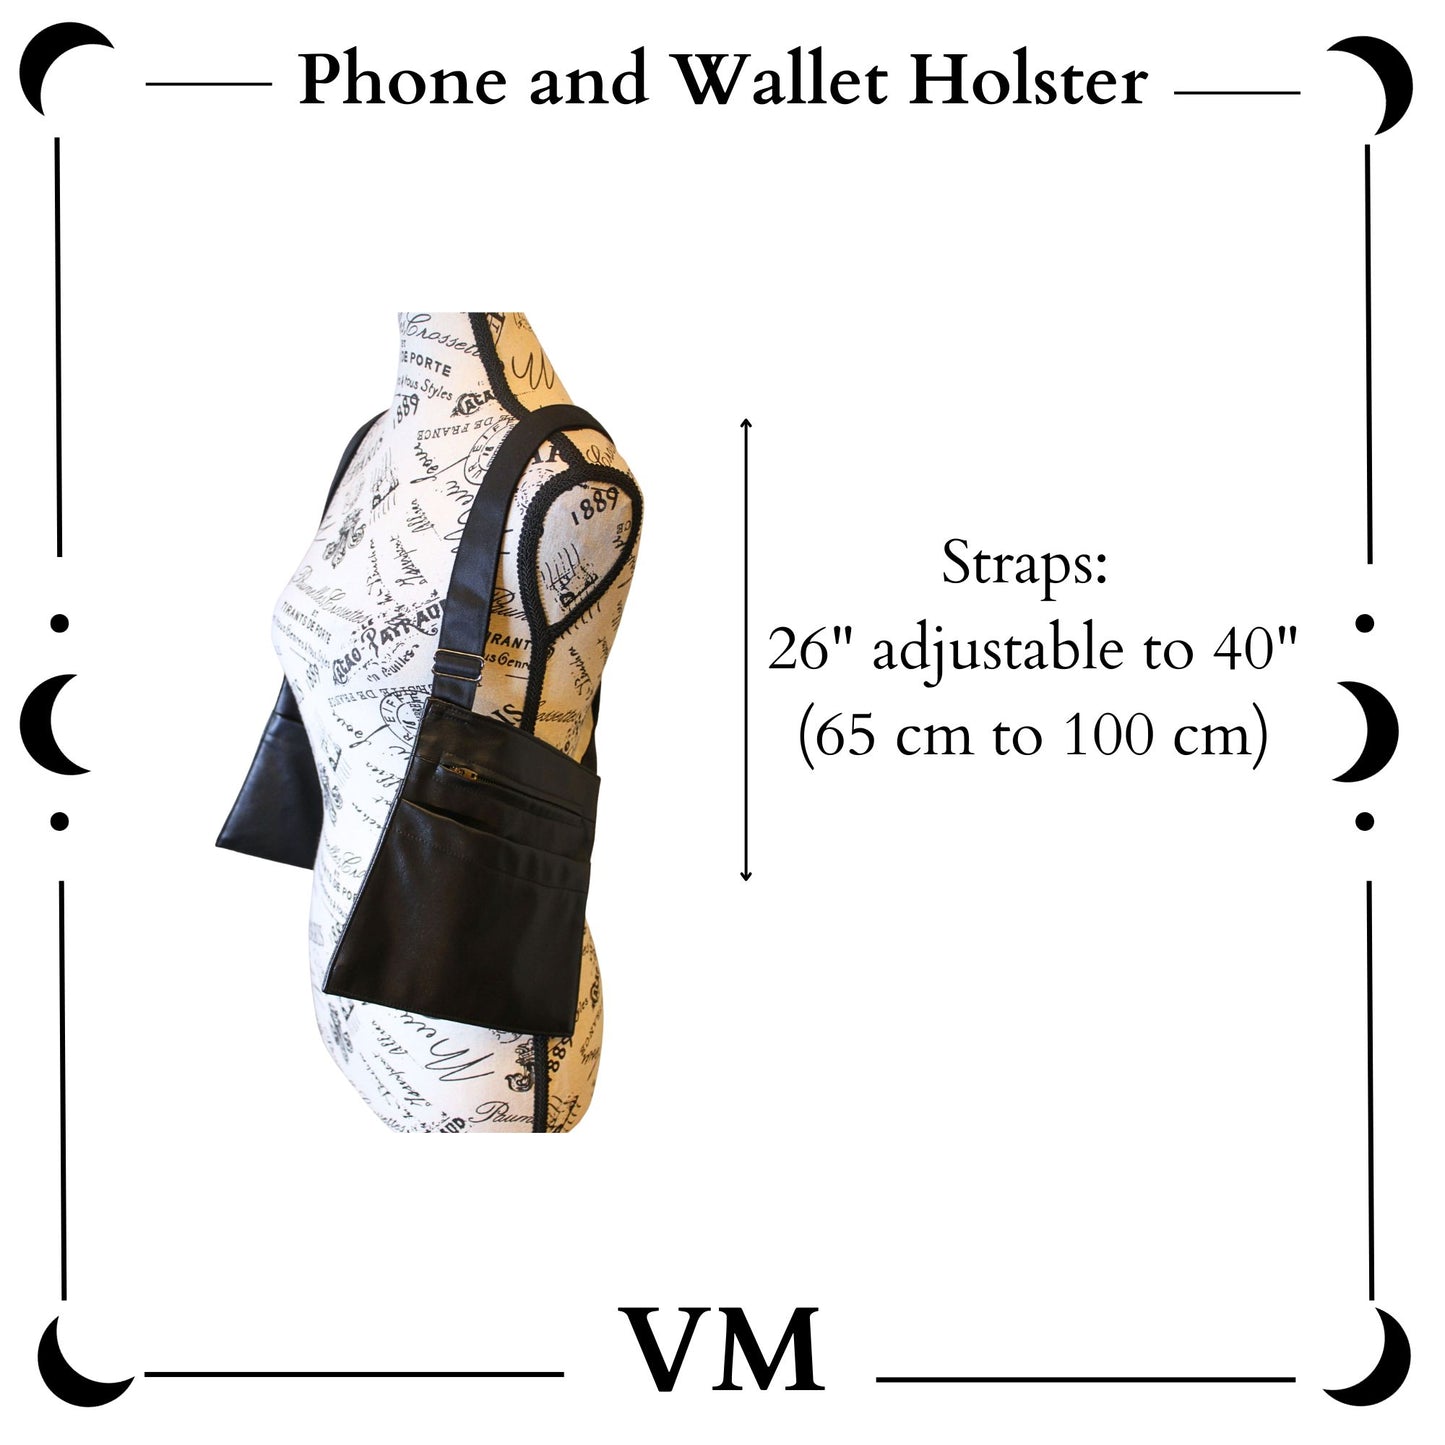 The VM Phone and Wallet Holster